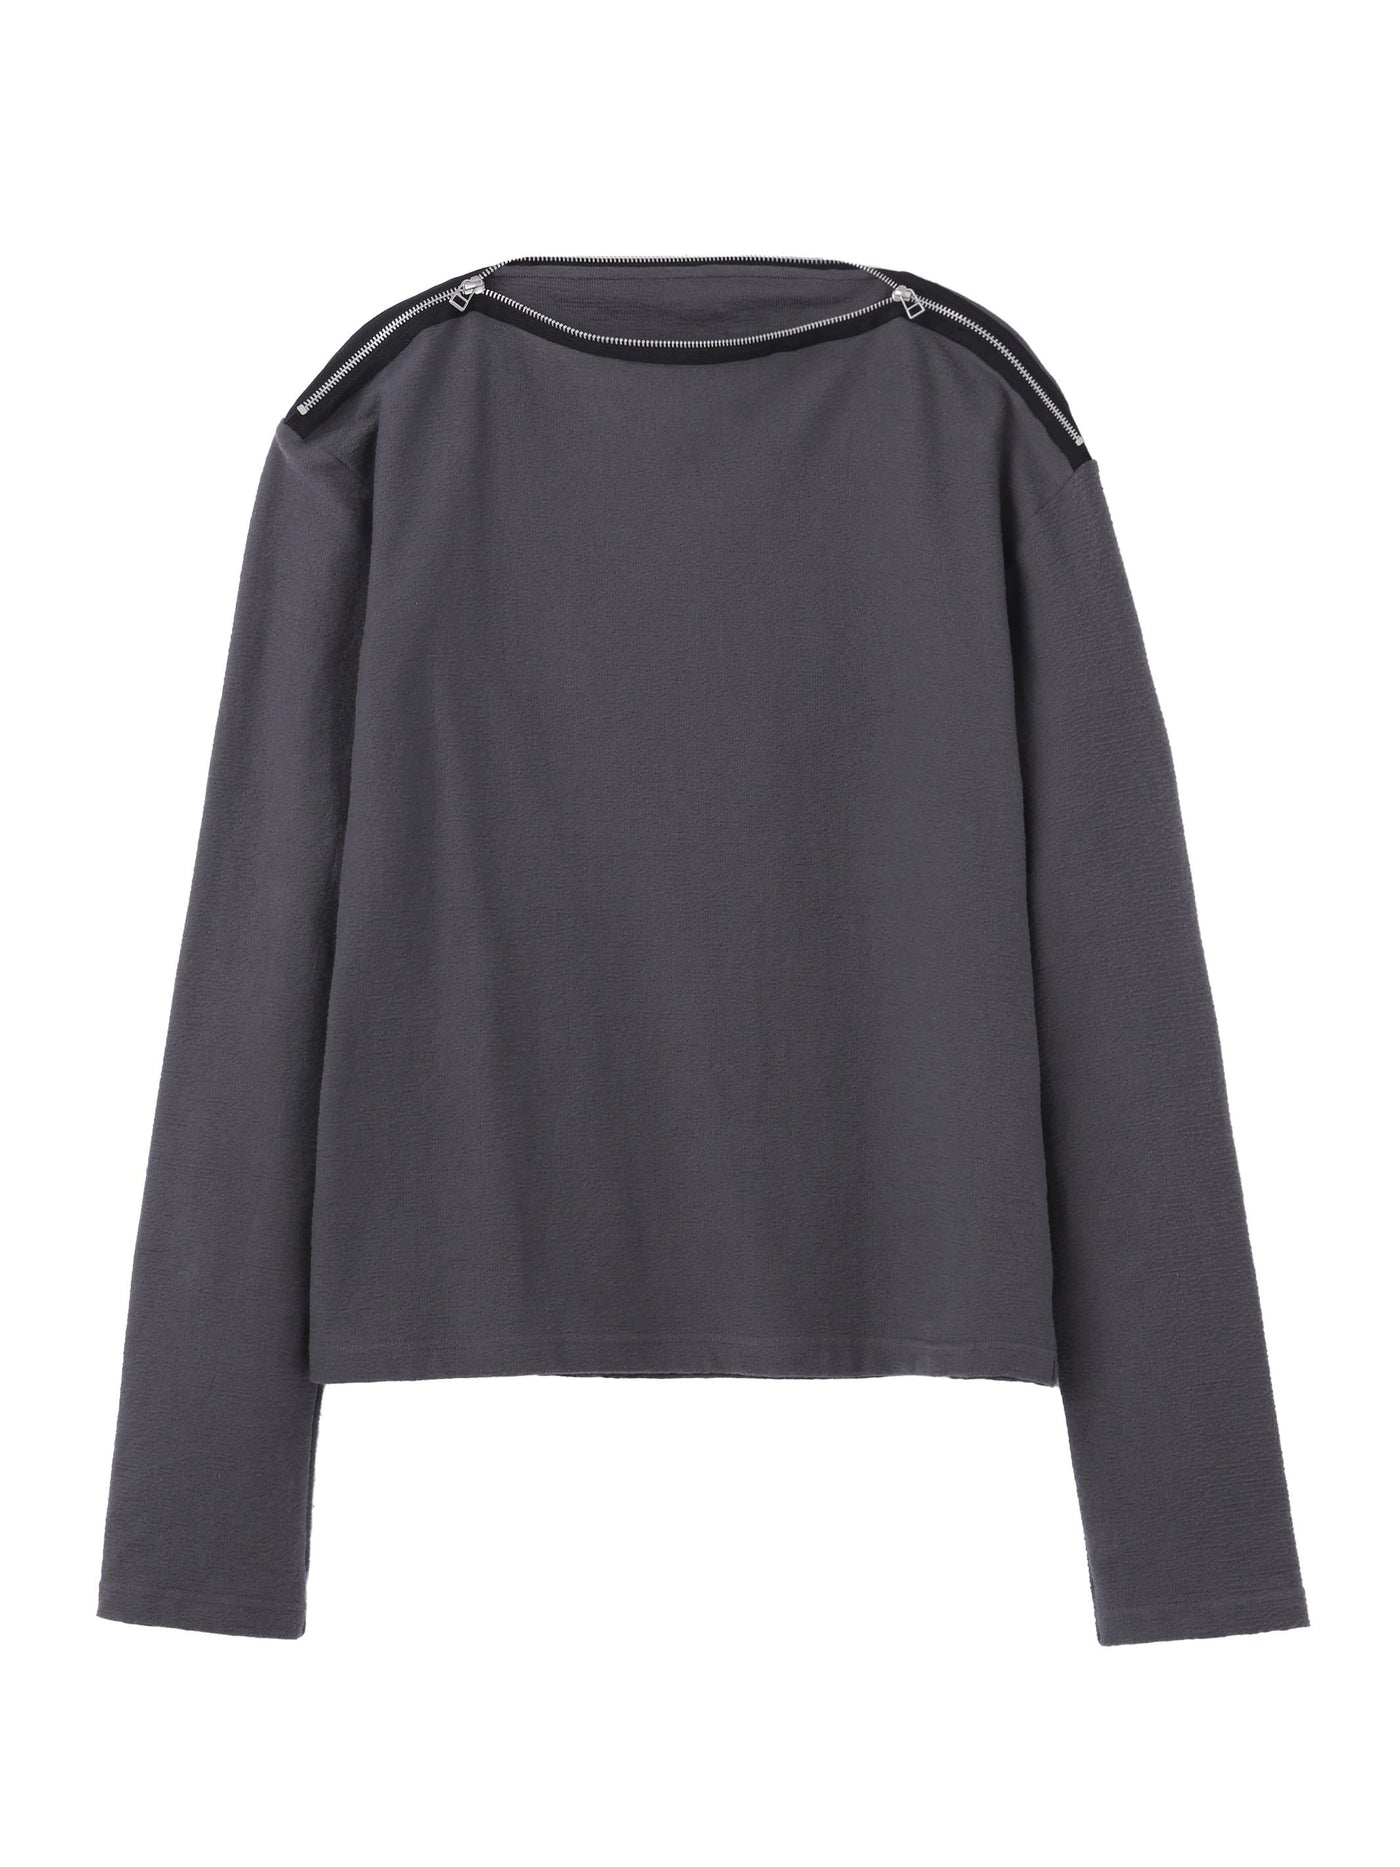 Uneven jersey zipped boat neck top